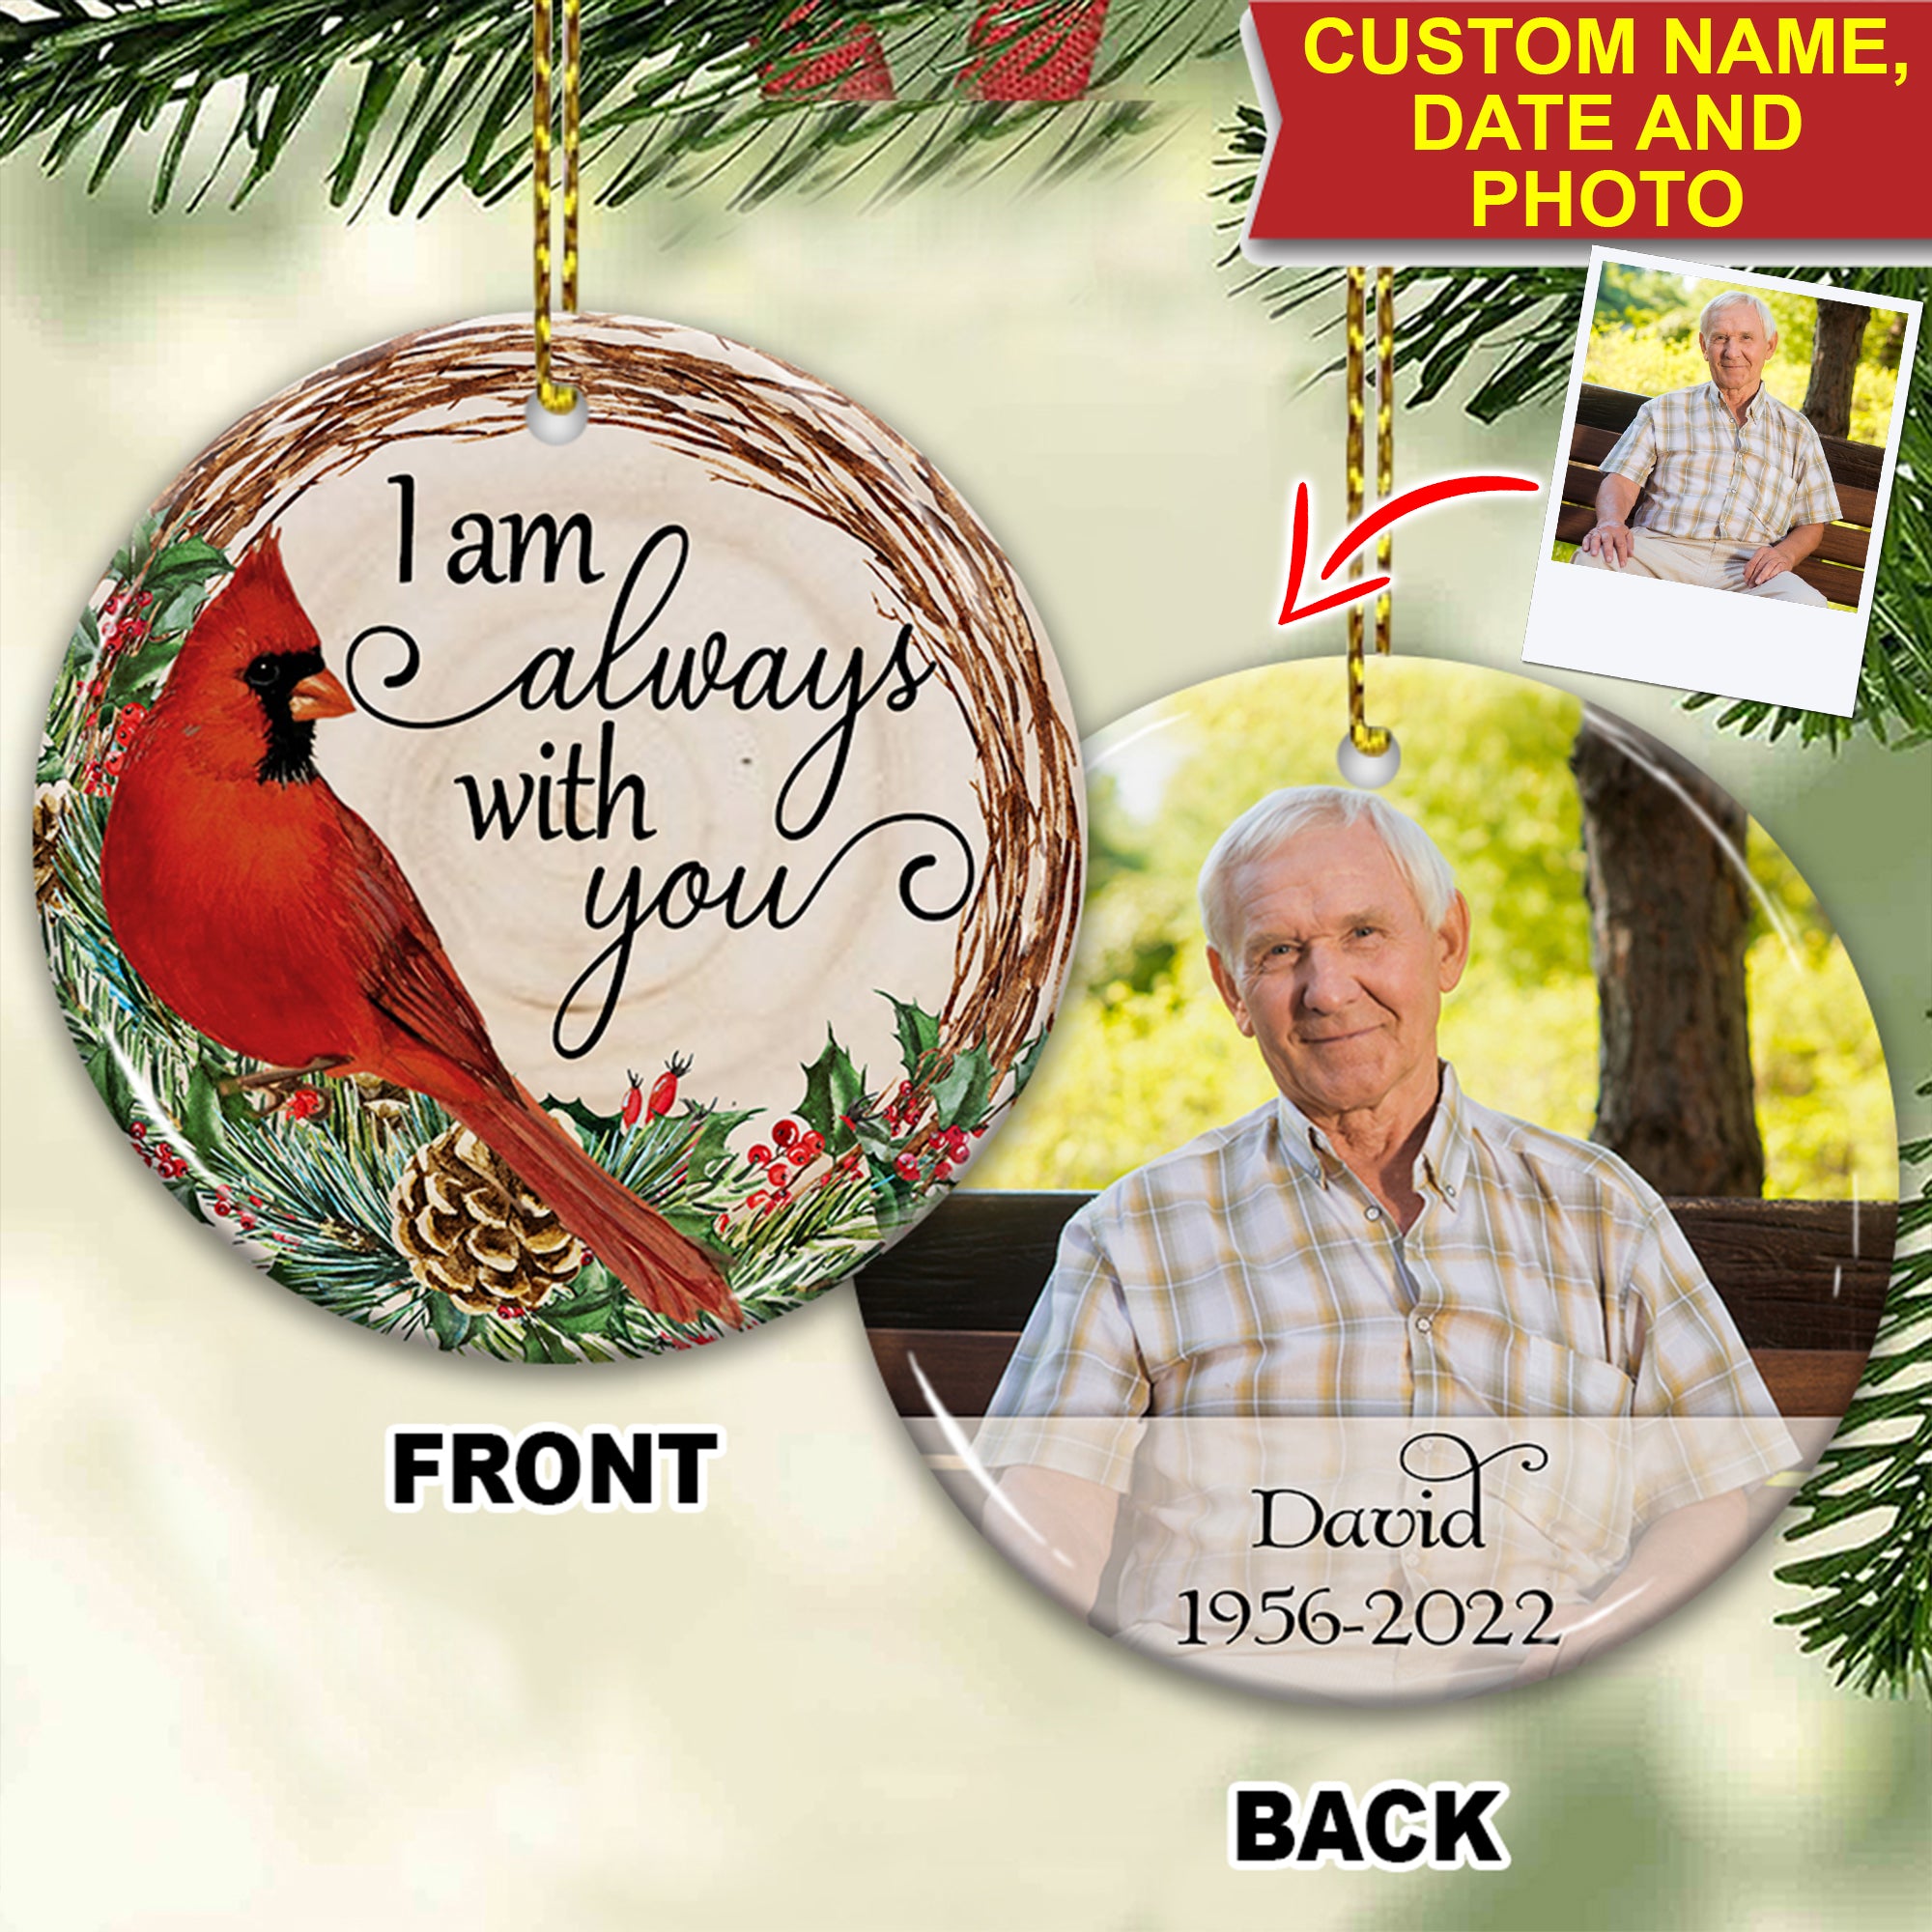 I Always With You - Custom Photo And Name- Personalized 2 Sides Ceramic Ornament - Gift For Family, Memorial Gift